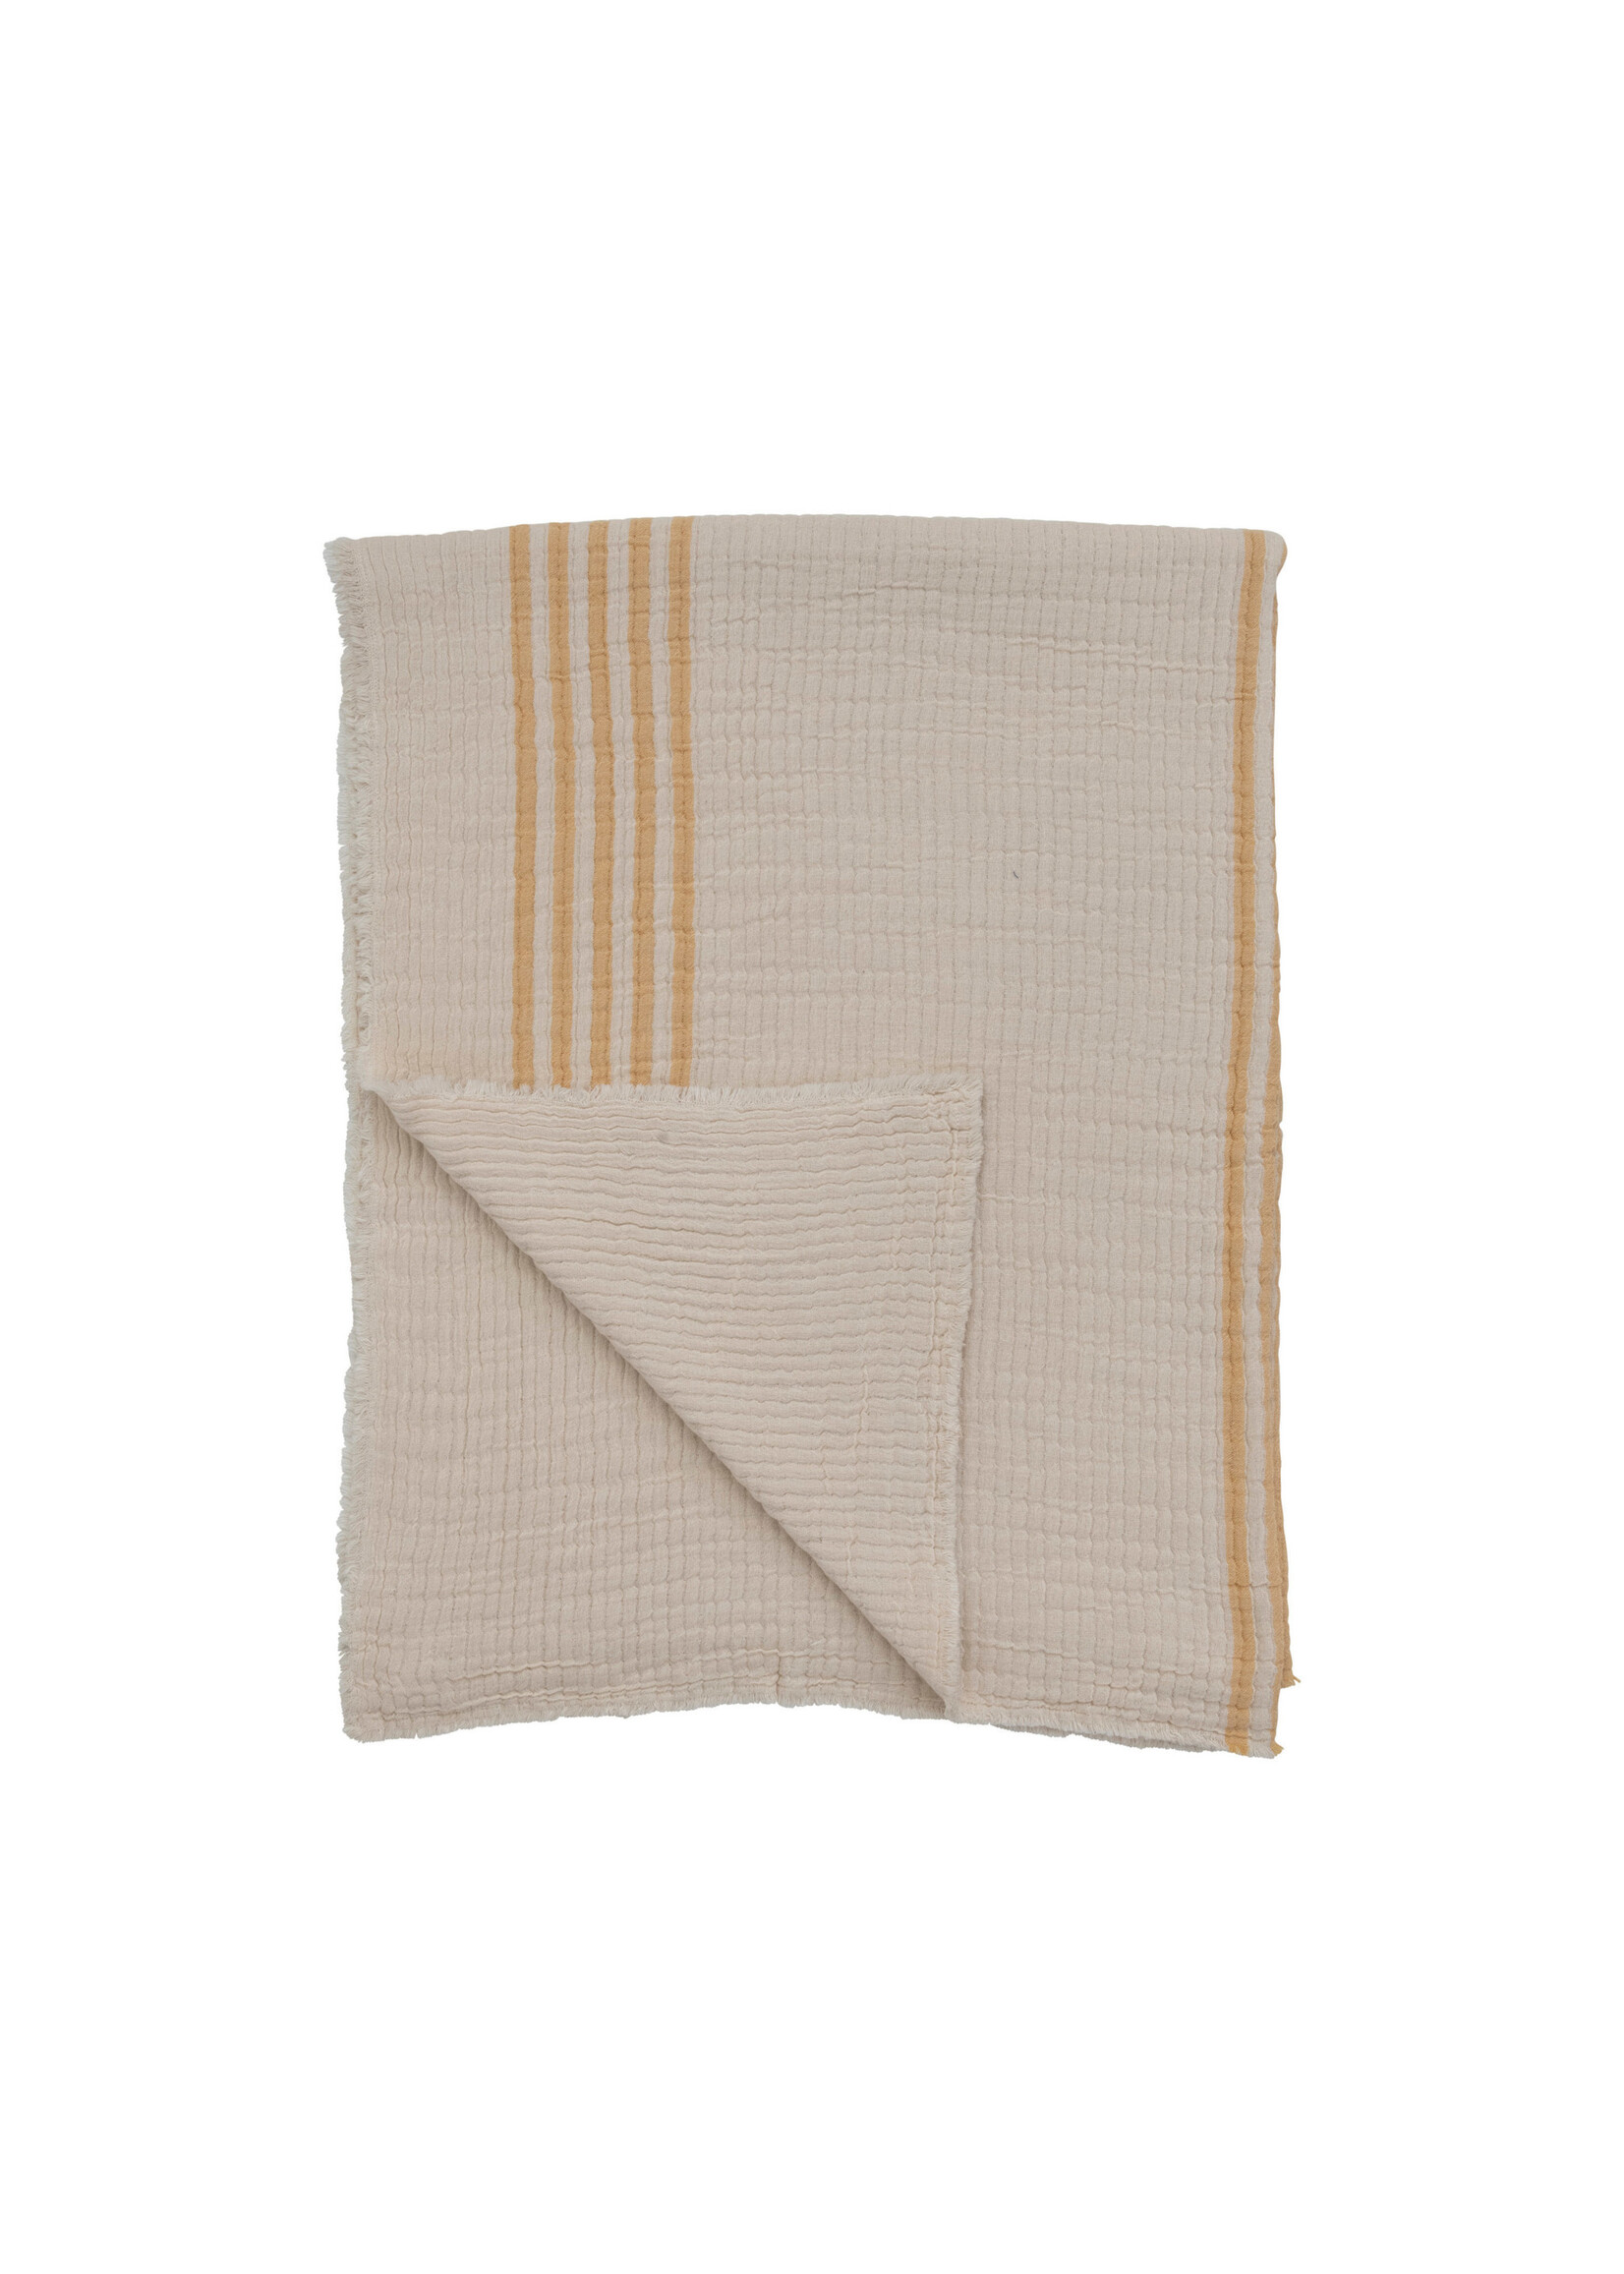 Cotton Double Cloth Stitched Throw with Stripes and Frayed Edges